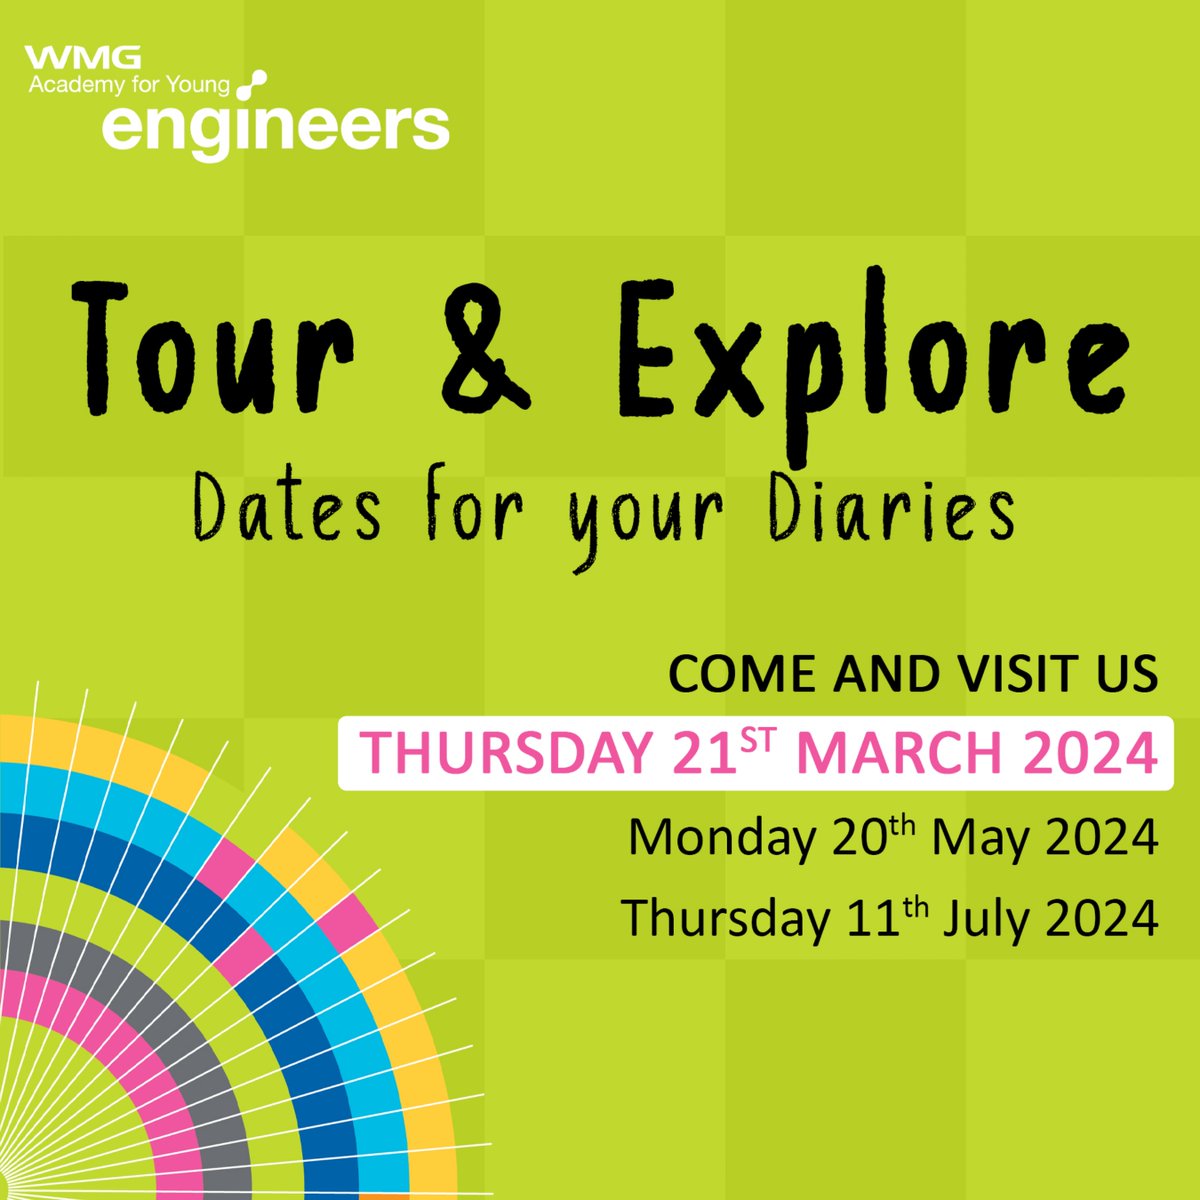 Come and tour with us at WMG Academy. 
Register here: rb.gy/lvww8b or email us at solihull.info@wmgacademy.org.uk
#OpenEvening #TourAndExplore #WMGAcademySolihull #WMGAcademy #ComeAndVisitUs